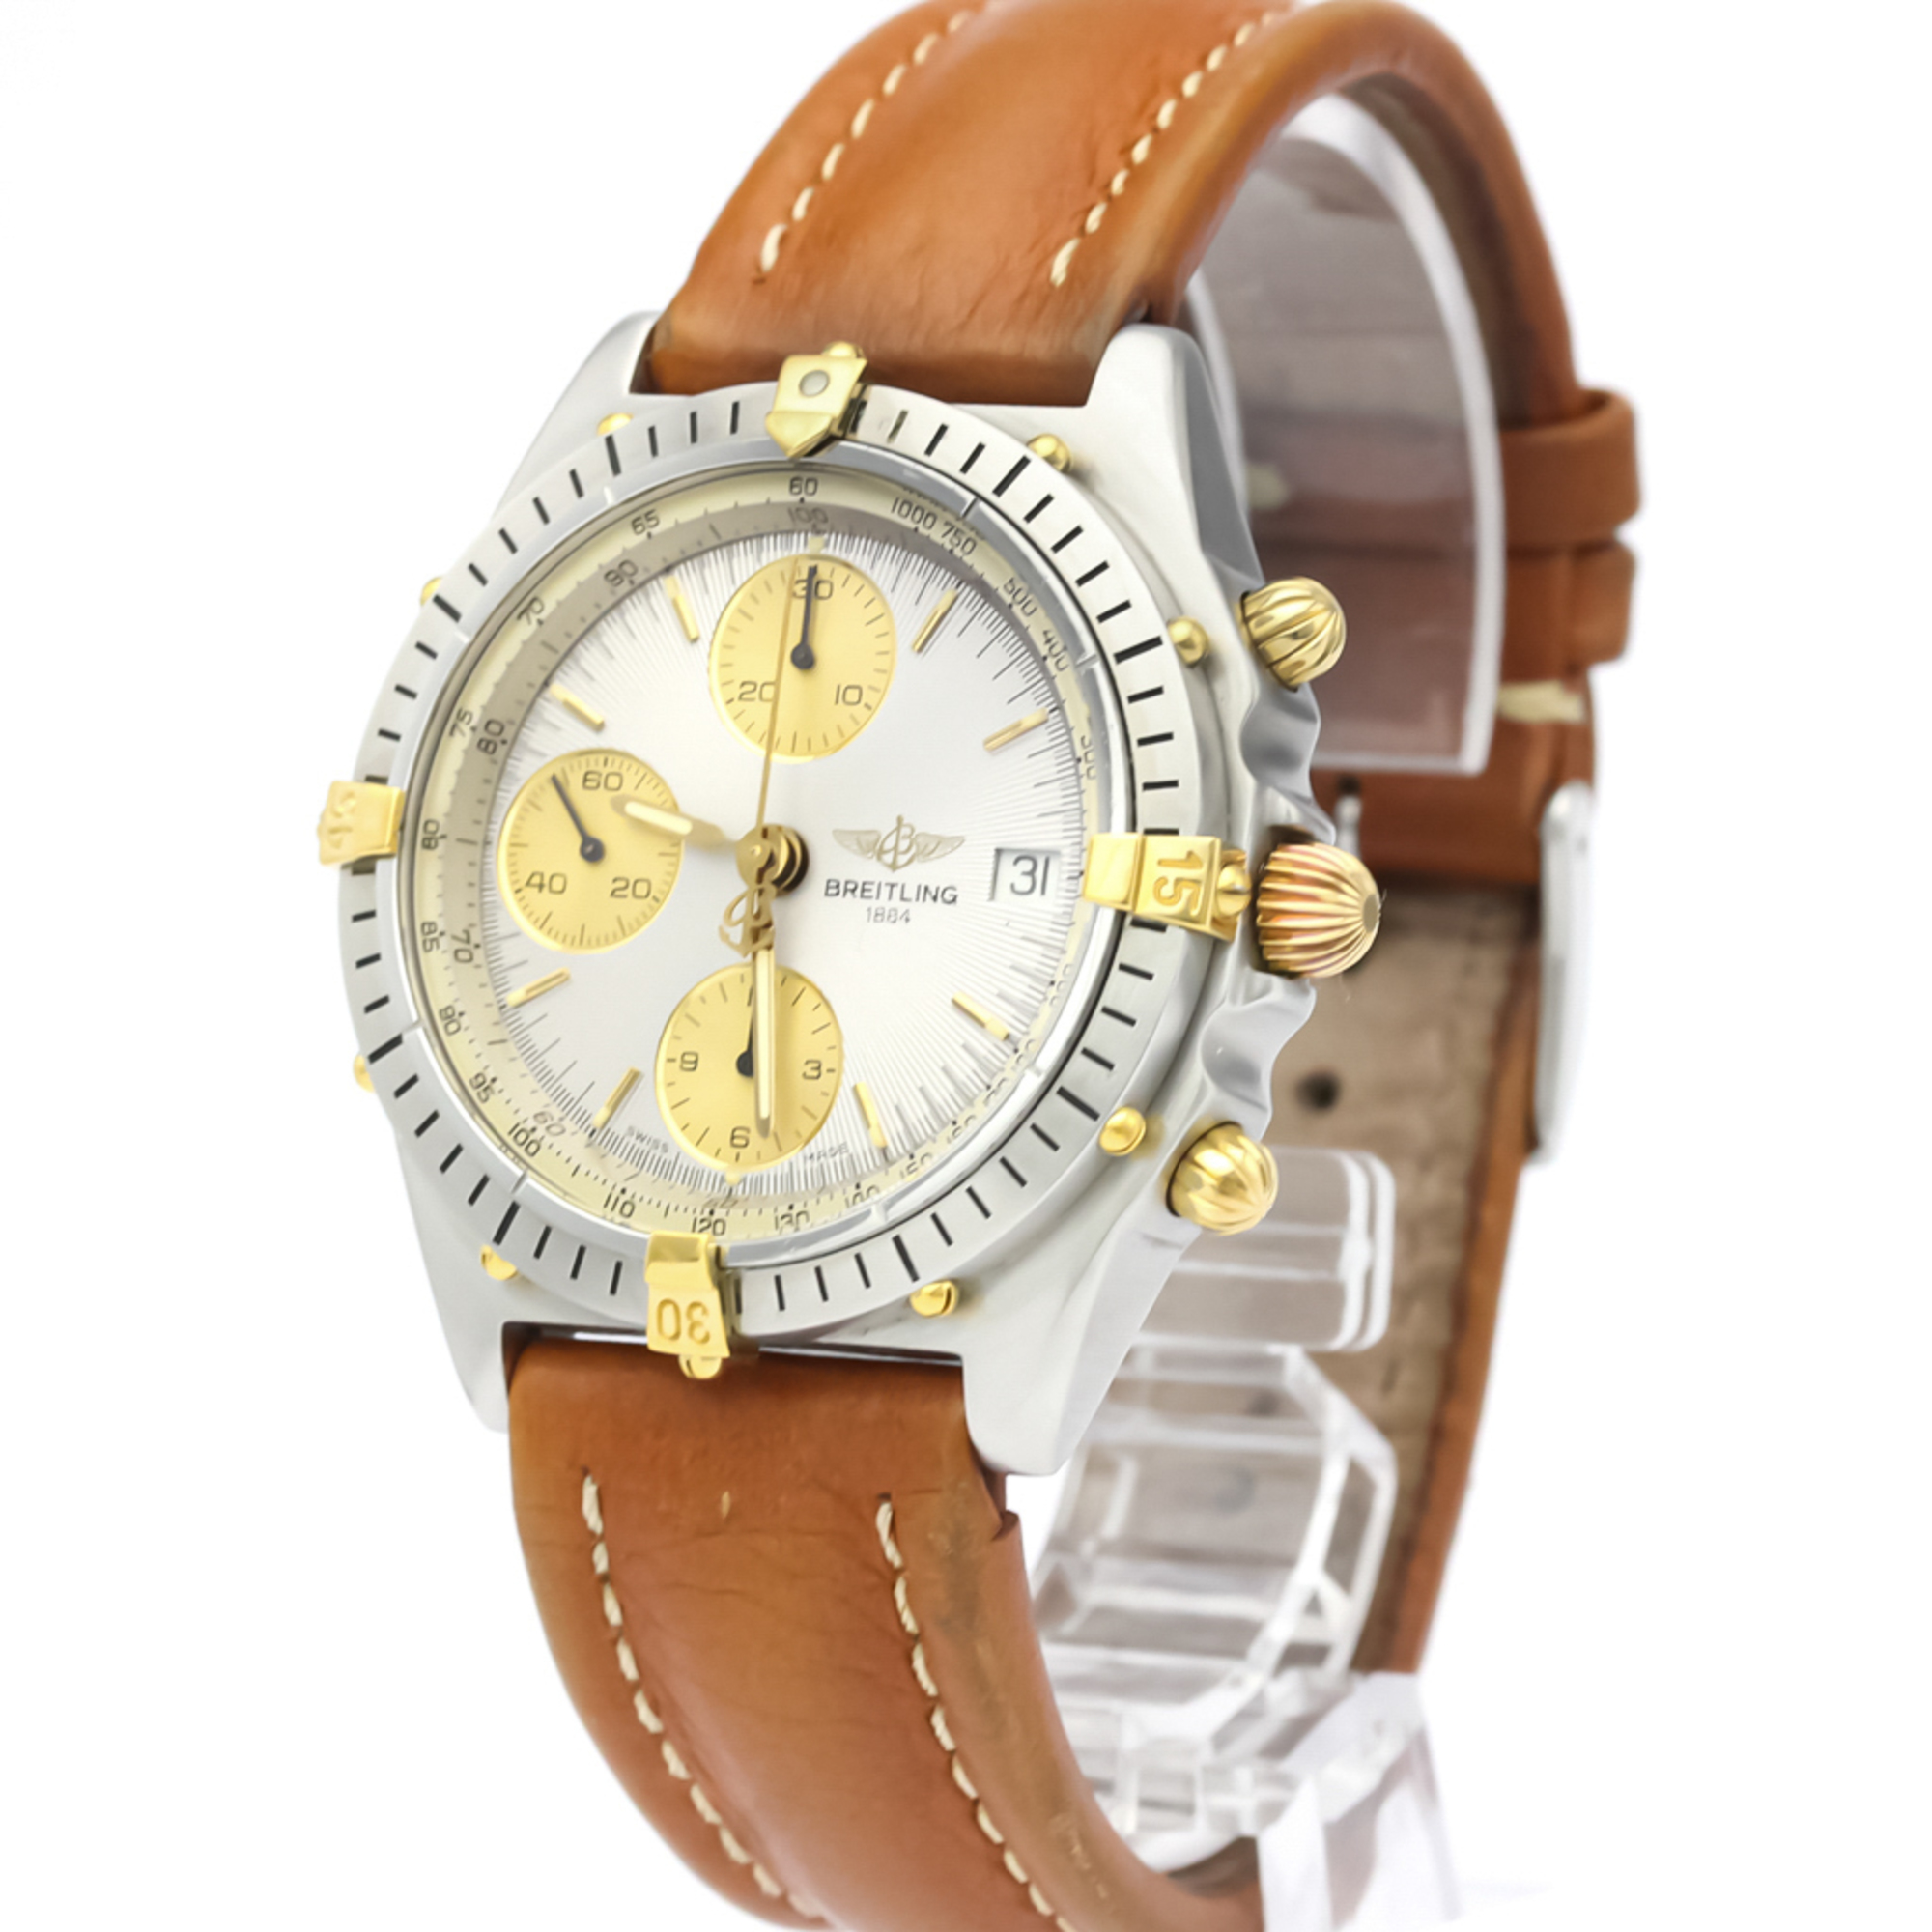 Breitling Chronomat Automatic Stainless Steel,Yellow Gold (18K) Men's Sports Watch B13048